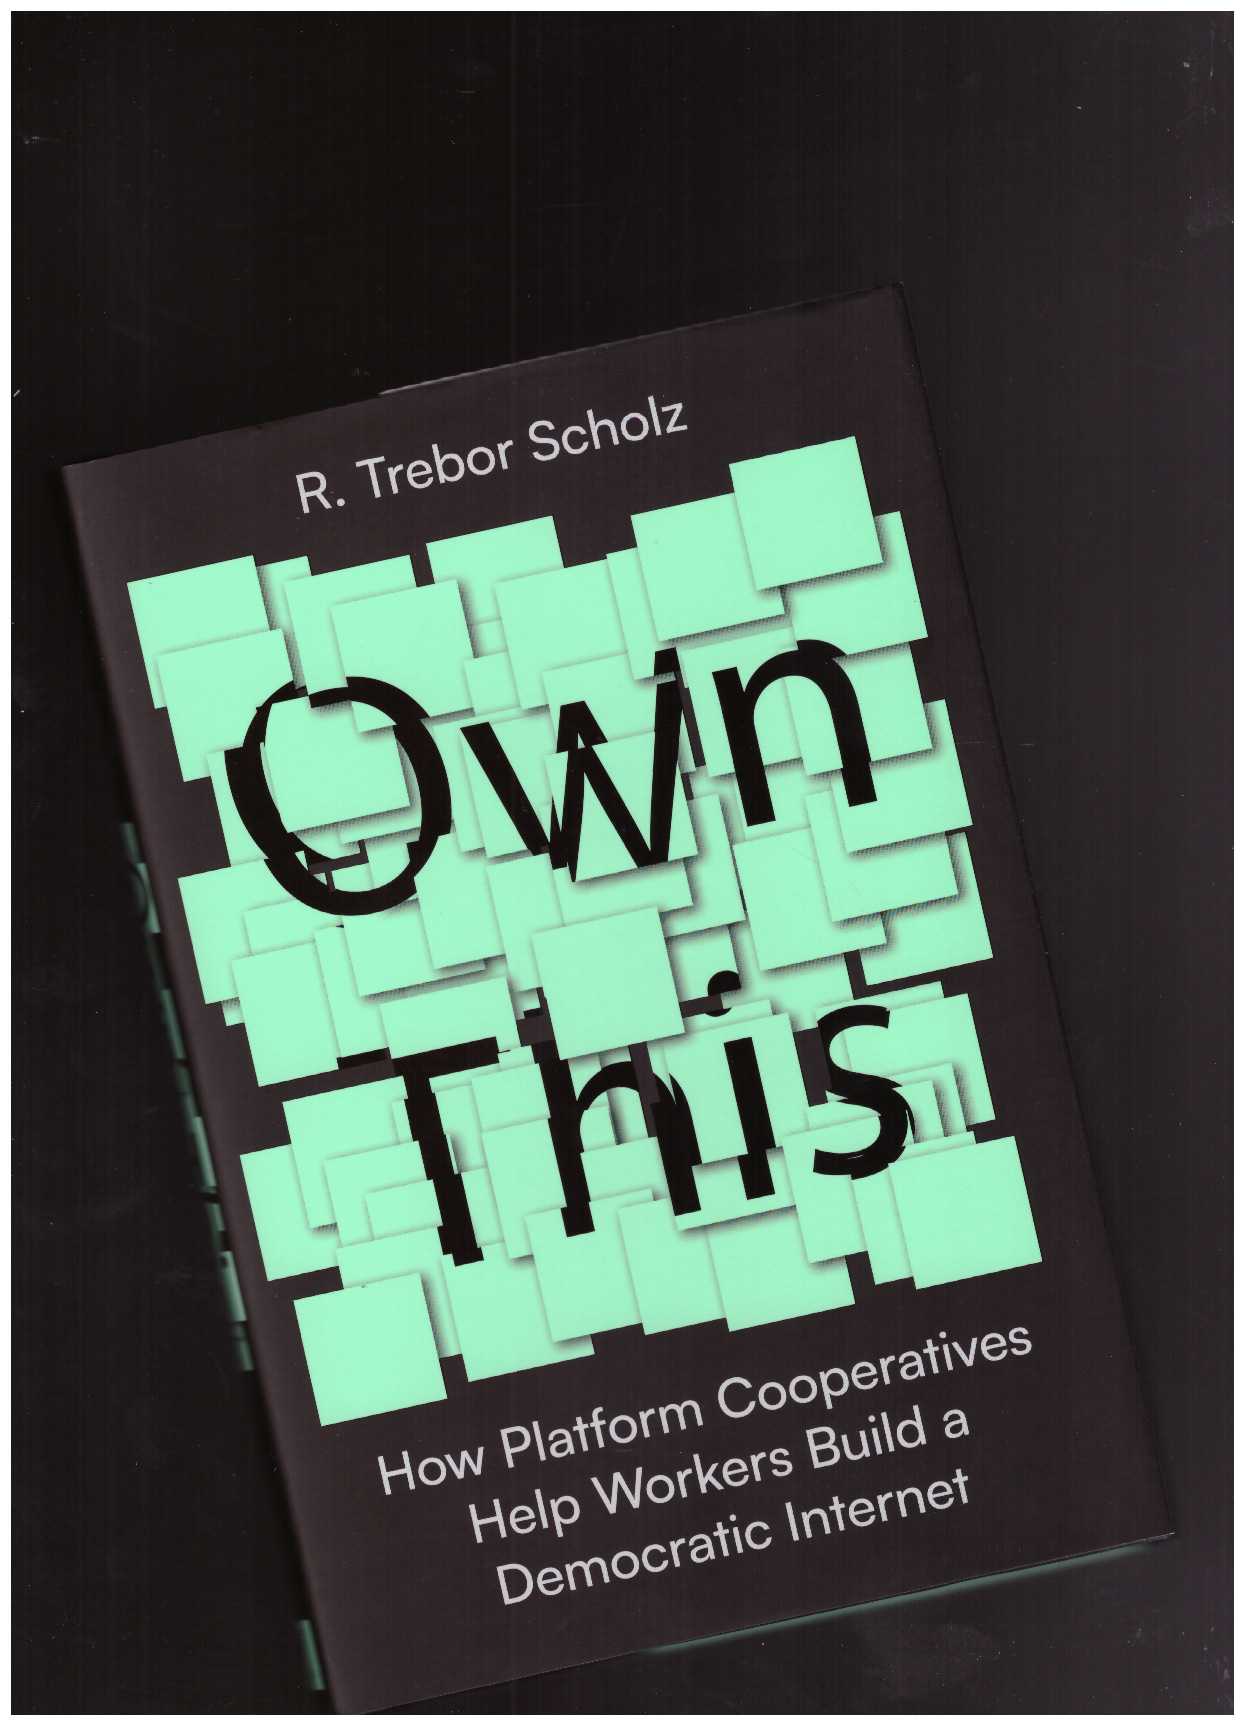 SCHOLZ, R. Trebor - Own This! How Platform Cooperatives Help Workers Build a Democratic Internet